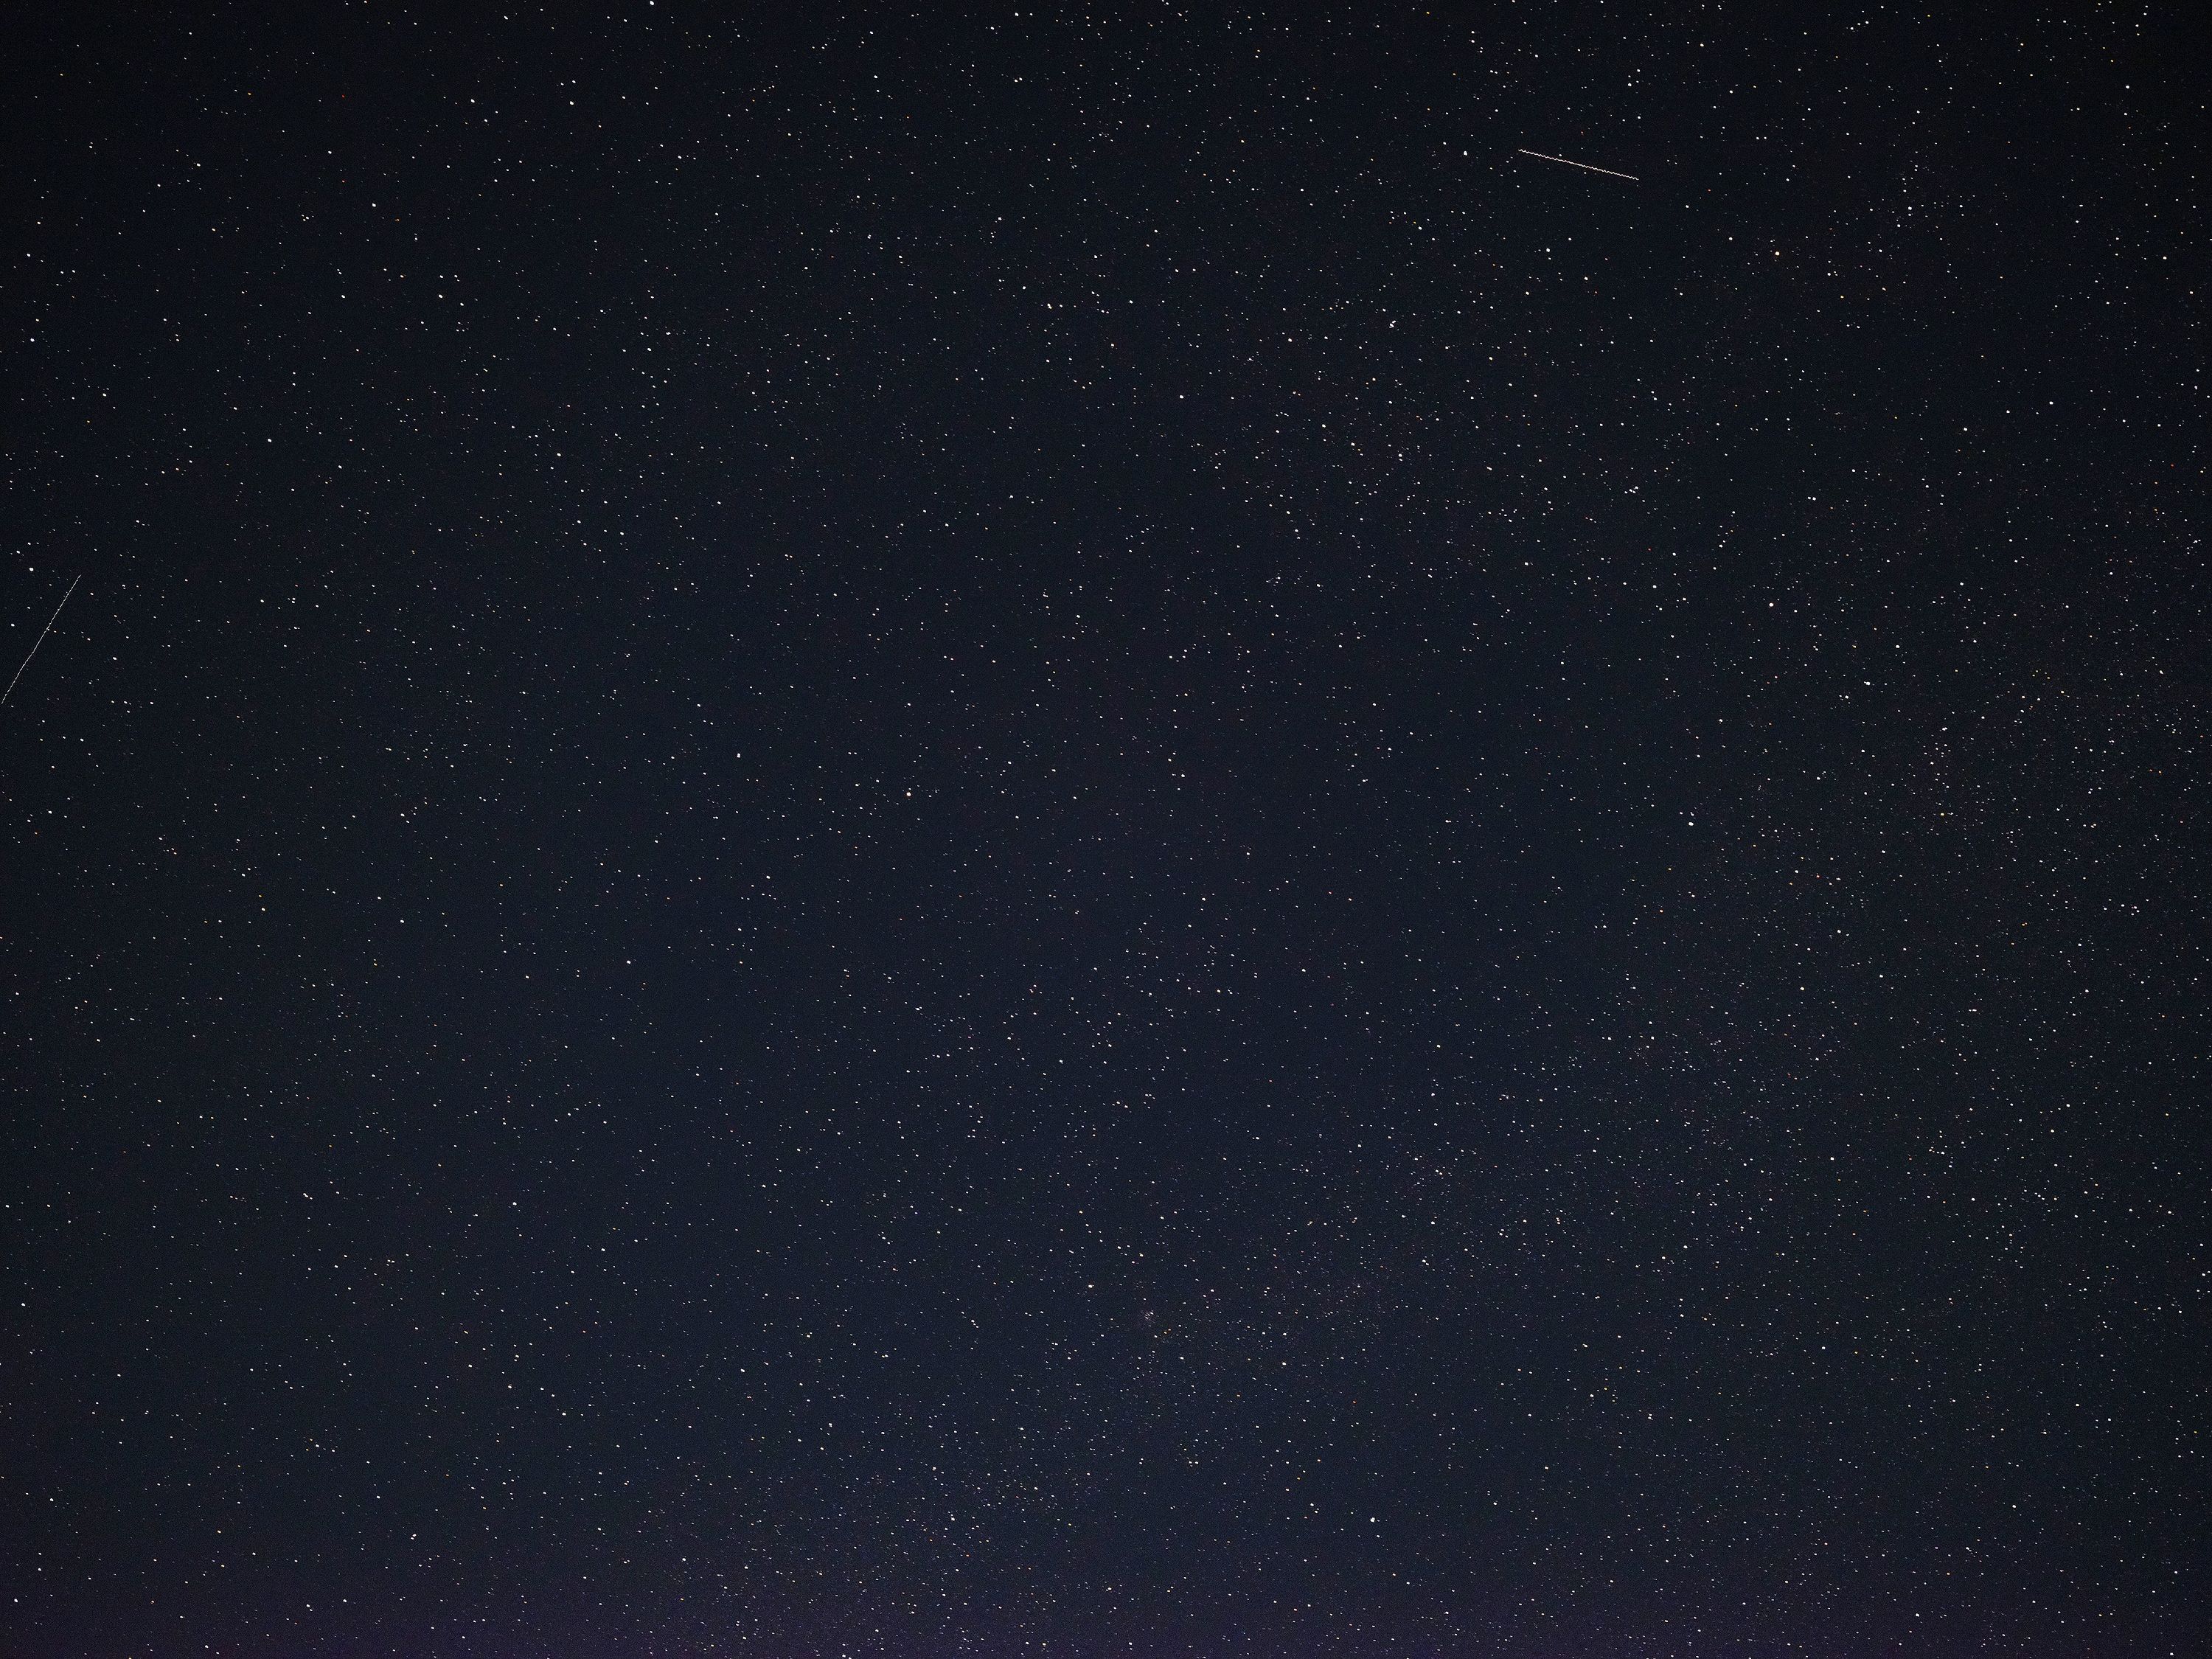 I took a stab at astrophotography with the 23mm too. Why not, right? Not an interesting shot, but man are there ever a lot of stars to look at when you view it 1:1.